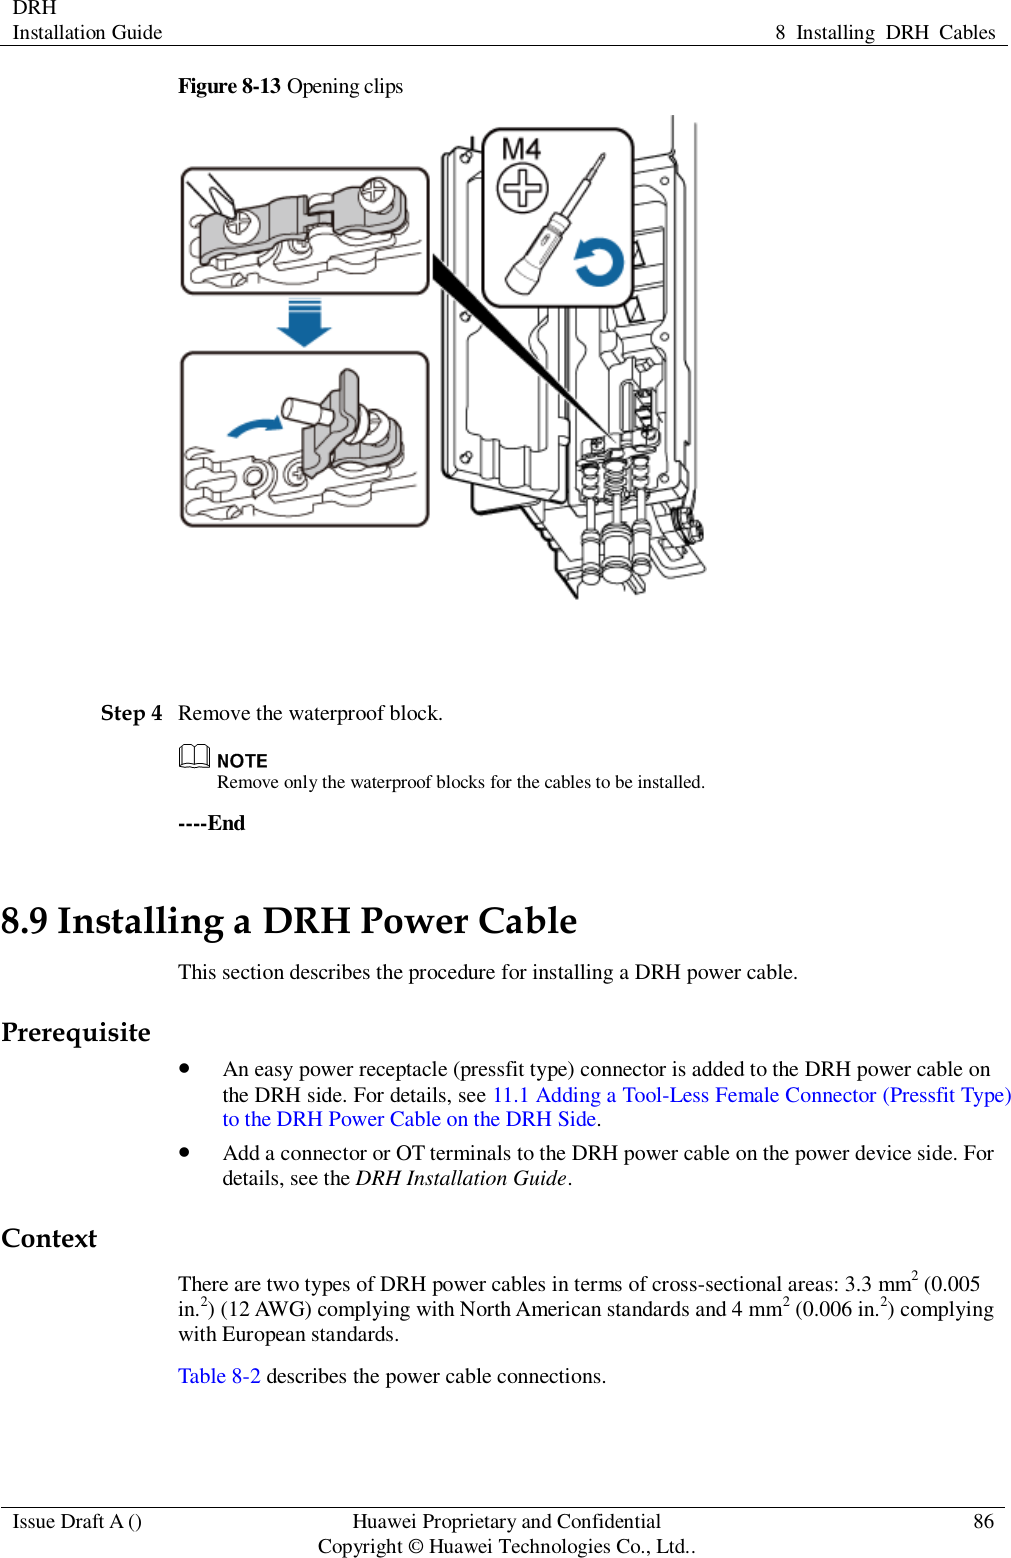 DRH   Installation Guide 8  Installing  DRH  Cables  Issue Draft A () Huawei Proprietary and Confidential                                     Copyright © Huawei Technologies Co., Ltd.. 86  Figure 8-13 Opening clips   Step 4 Remove the waterproof block.  Remove only the waterproof blocks for the cables to be installed. ----End 8.9 Installing a DRH Power Cable This section describes the procedure for installing a DRH power cable. Prerequisite  An easy power receptacle (pressfit type) connector is added to the DRH power cable on the DRH side. For details, see 11.1 Adding a Tool-Less Female Connector (Pressfit Type) to the DRH Power Cable on the DRH Side.  Add a connector or OT terminals to the DRH power cable on the power device side. For details, see the DRH Installation Guide. Context There are two types of DRH power cables in terms of cross-sectional areas: 3.3 mm2 (0.005 in.2) (12 AWG) complying with North American standards and 4 mm2 (0.006 in.2) complying with European standards. Table 8-2 describes the power cable connections. 